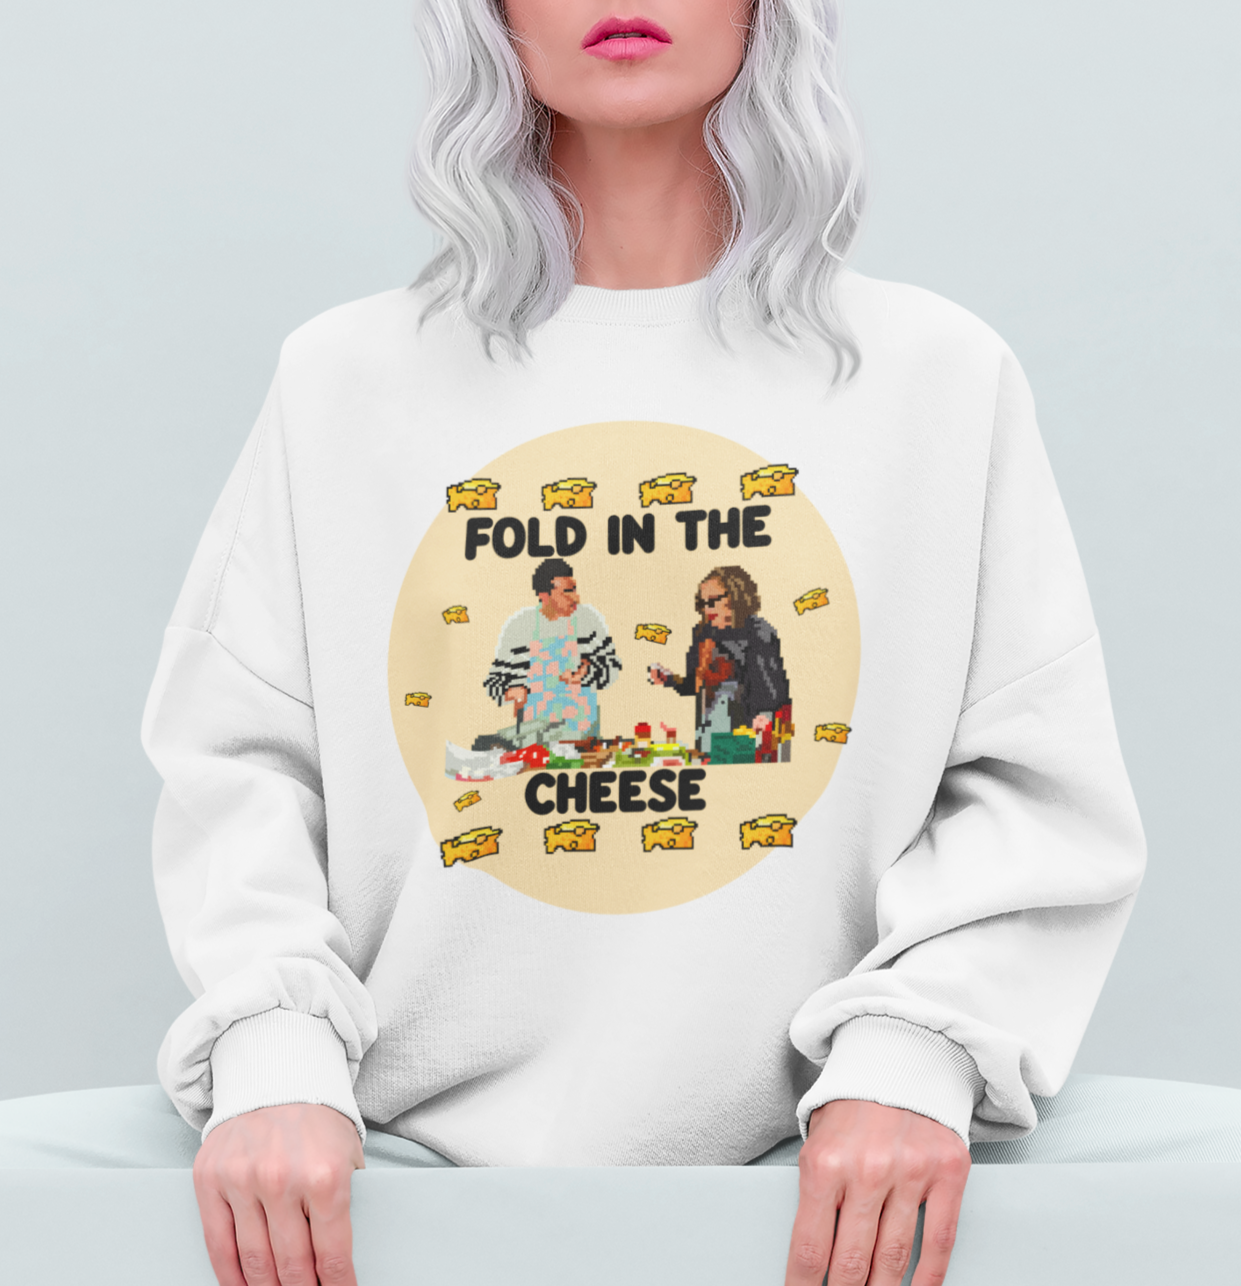 White sweatshirt with moira and david rose saying fold in the cheese - HighCiti